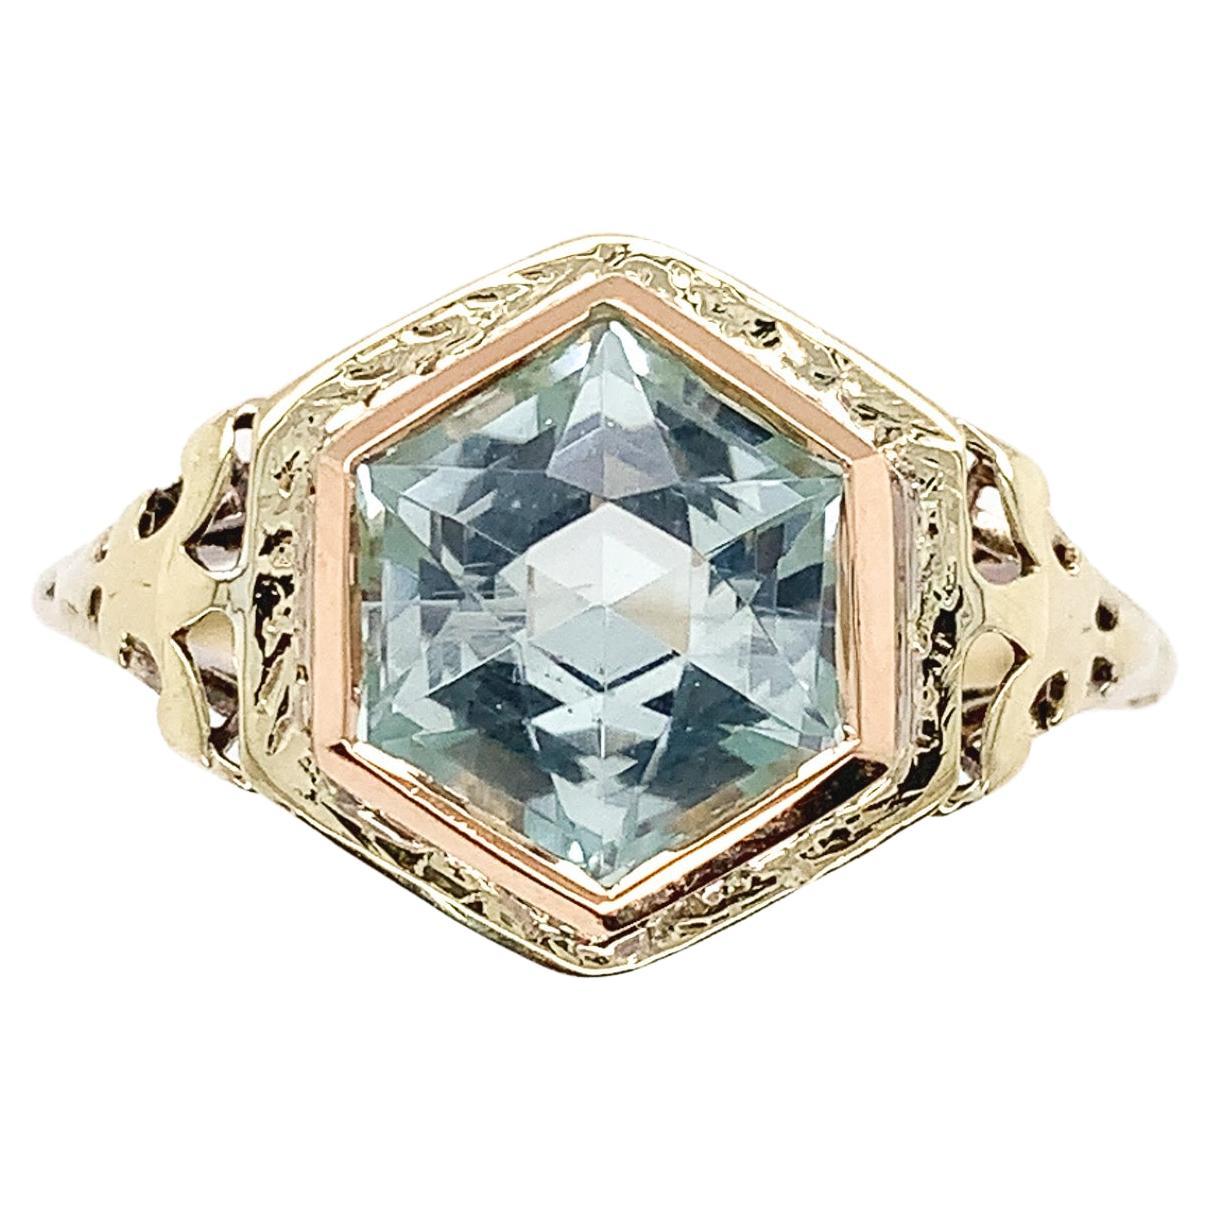 14K Yellow Gold Art Deco Filigree Ring with a Specialty Hexagon Cut Aquamarine For Sale